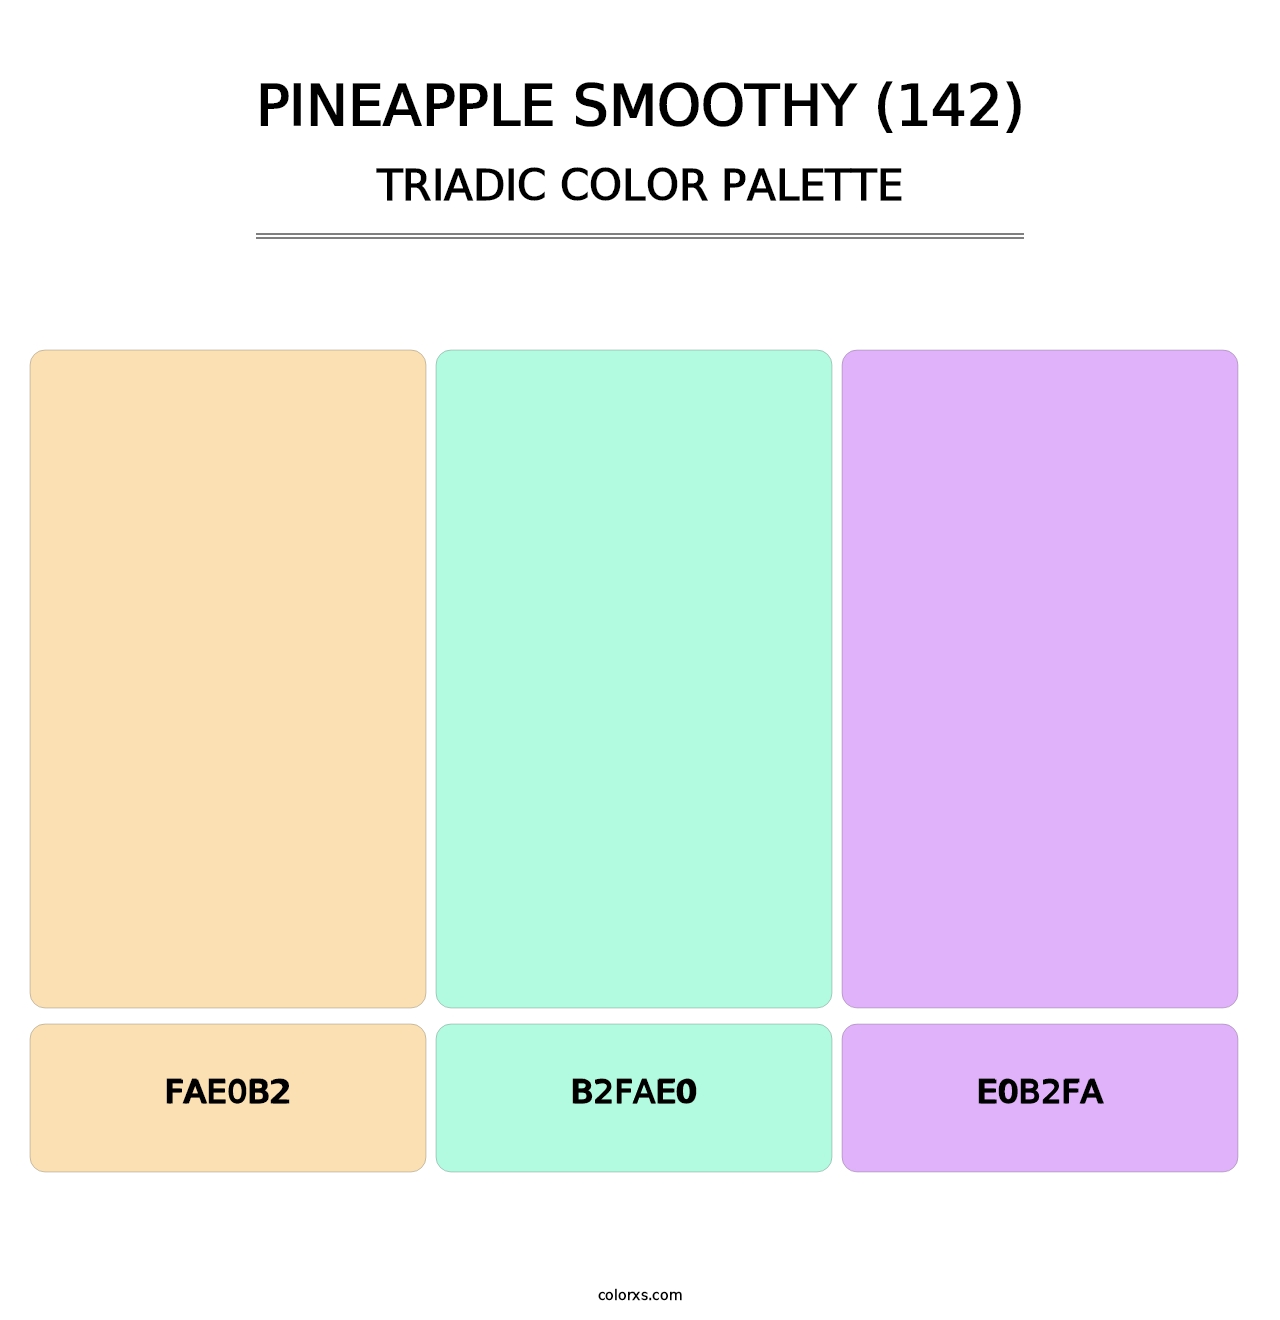 Pineapple Smoothy (142) - Triadic Color Palette